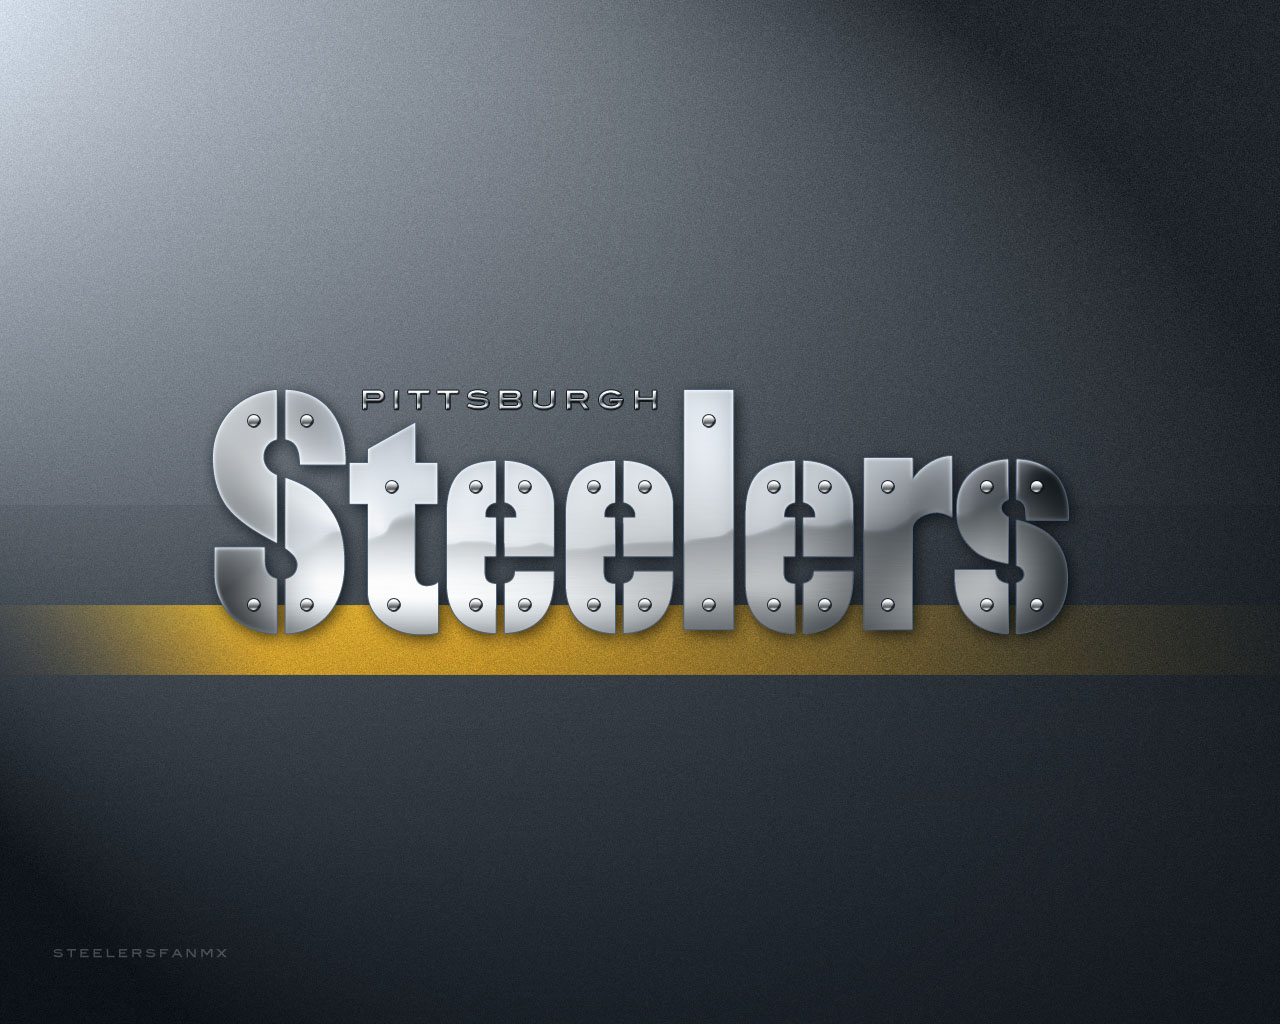 Pittsburgh Steelers wallpaper HD images